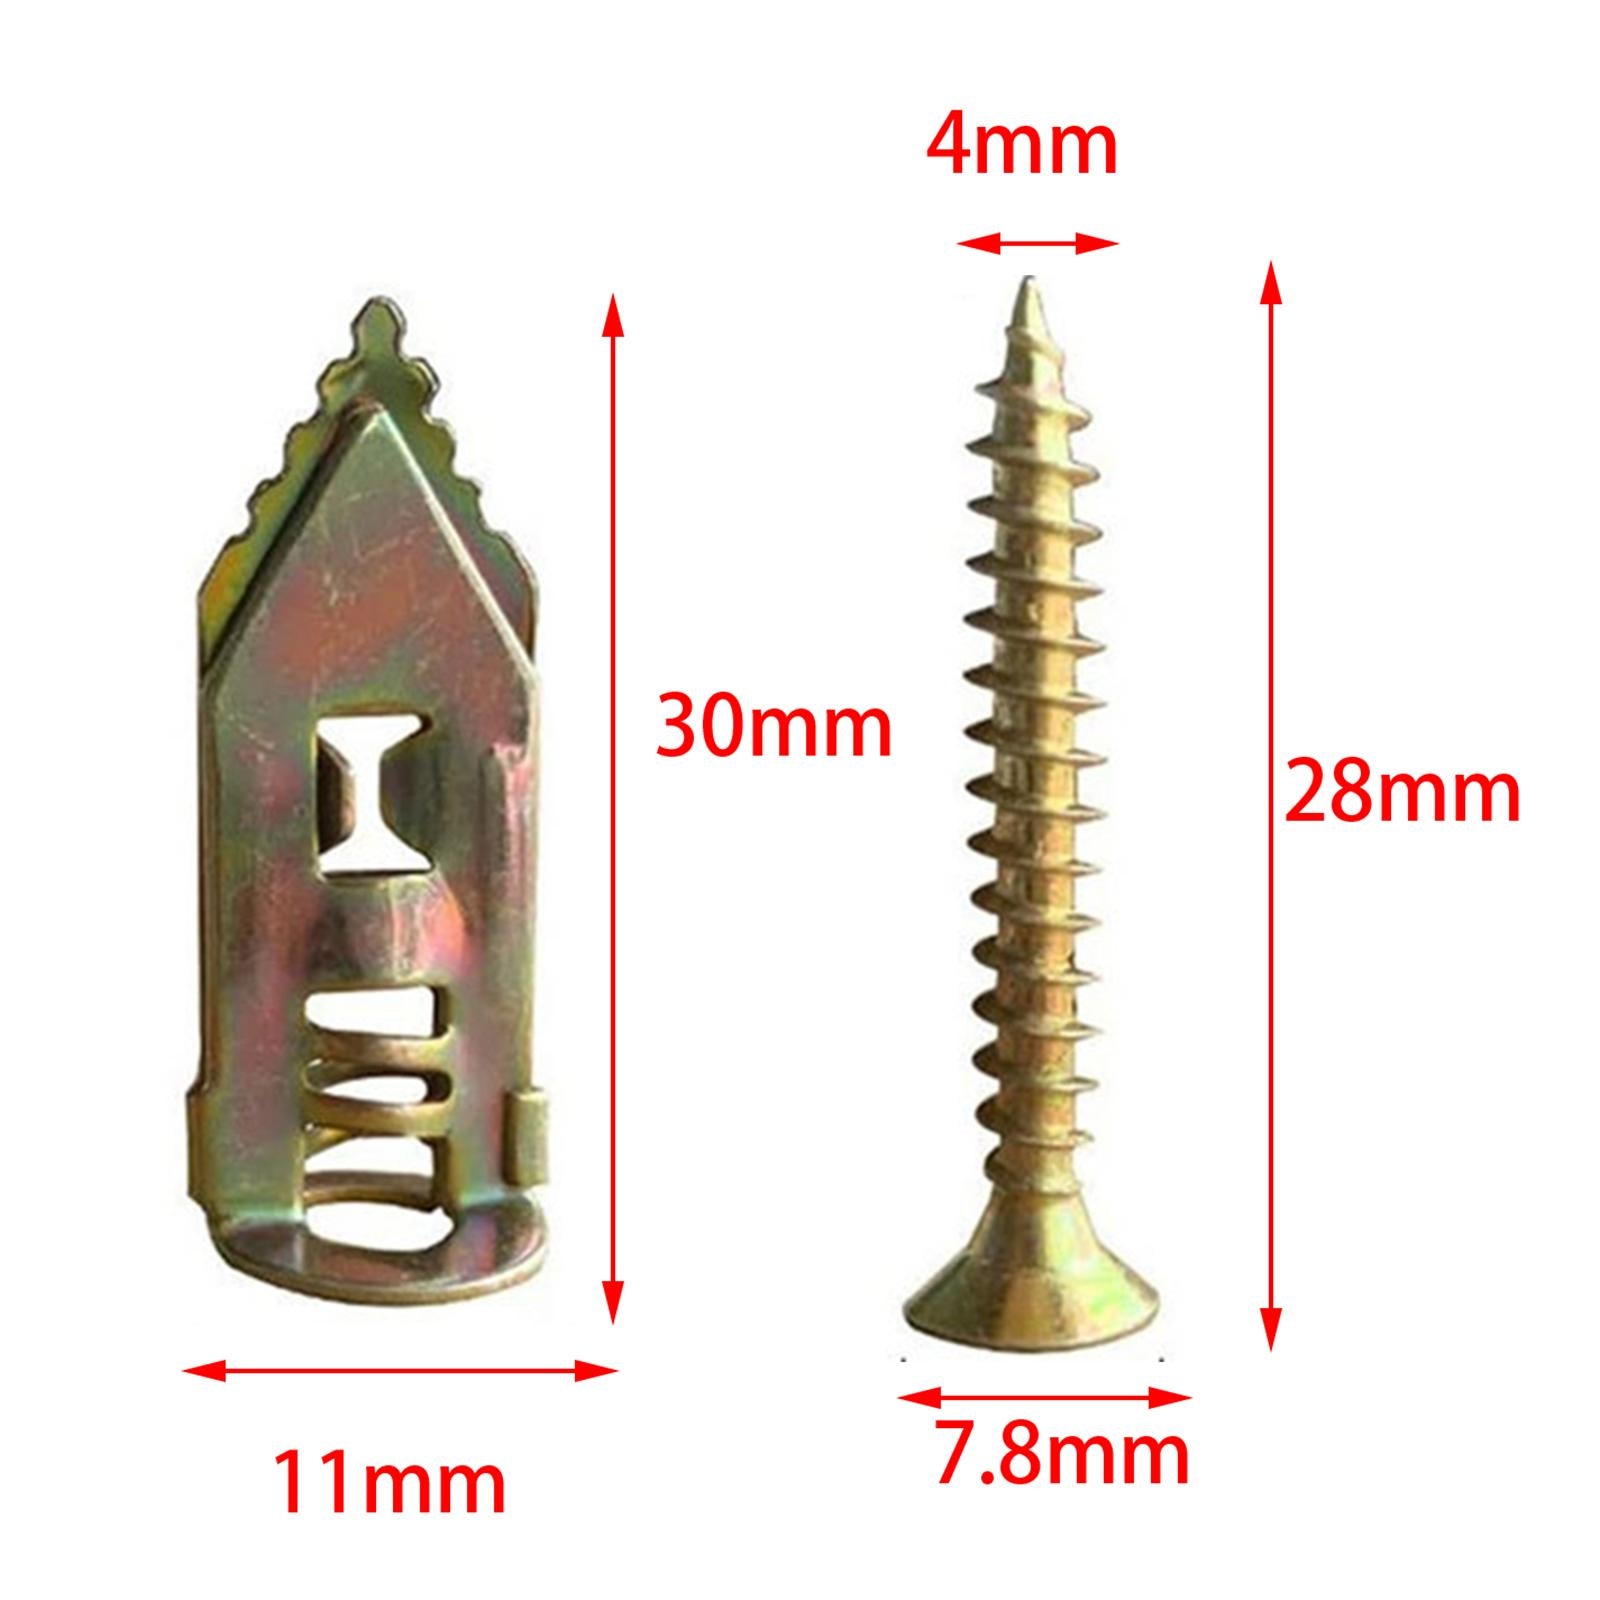 20x Drywall Self Drilling Anchors Screws Kit Easy Application for TV Bike 12x30mm 20pcs Color